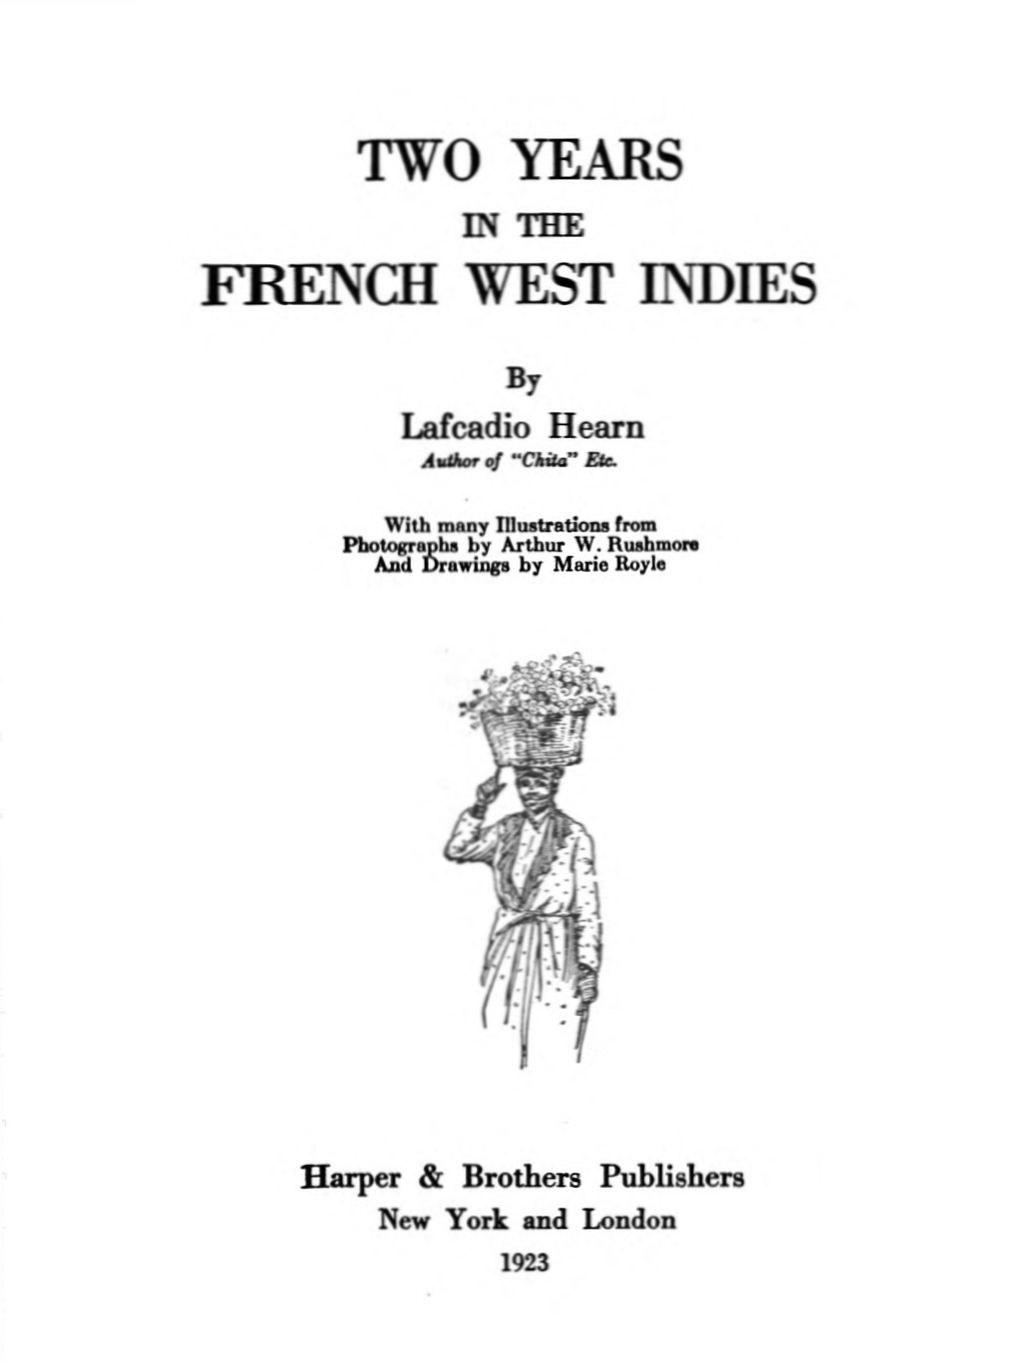 The Project Gutenberg eBook of Two Years in the French West Indies, by Lafcadio Hearn. photo